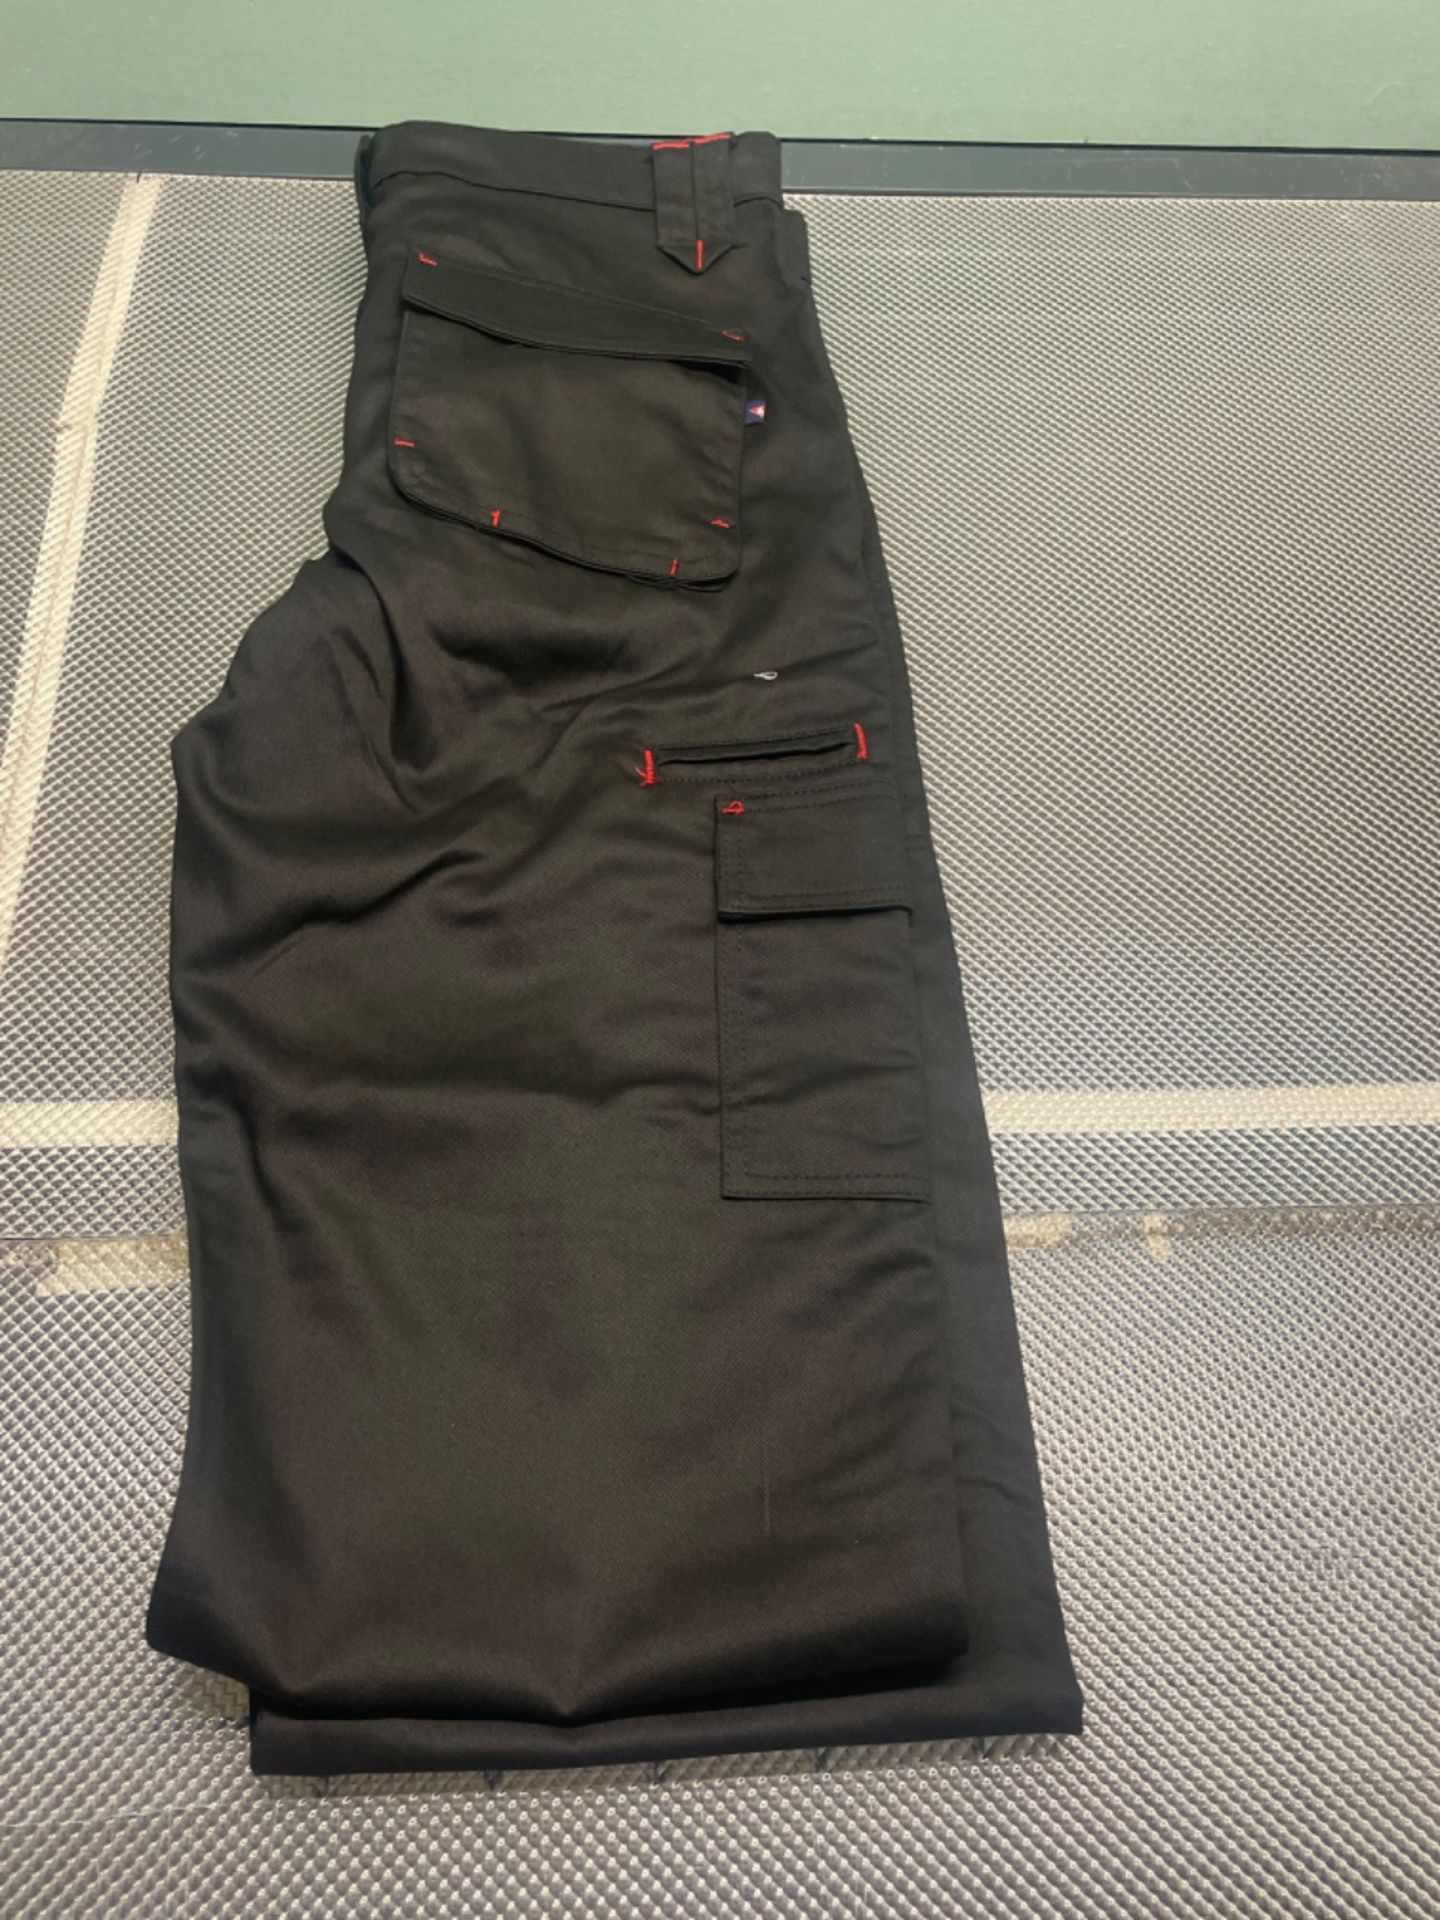 Lee Cooper Workwear Mens Multi Pocket Easy Care Heavy Duty Knee Pad Pockets Safety Work Cargo Trous - Image 3 of 3